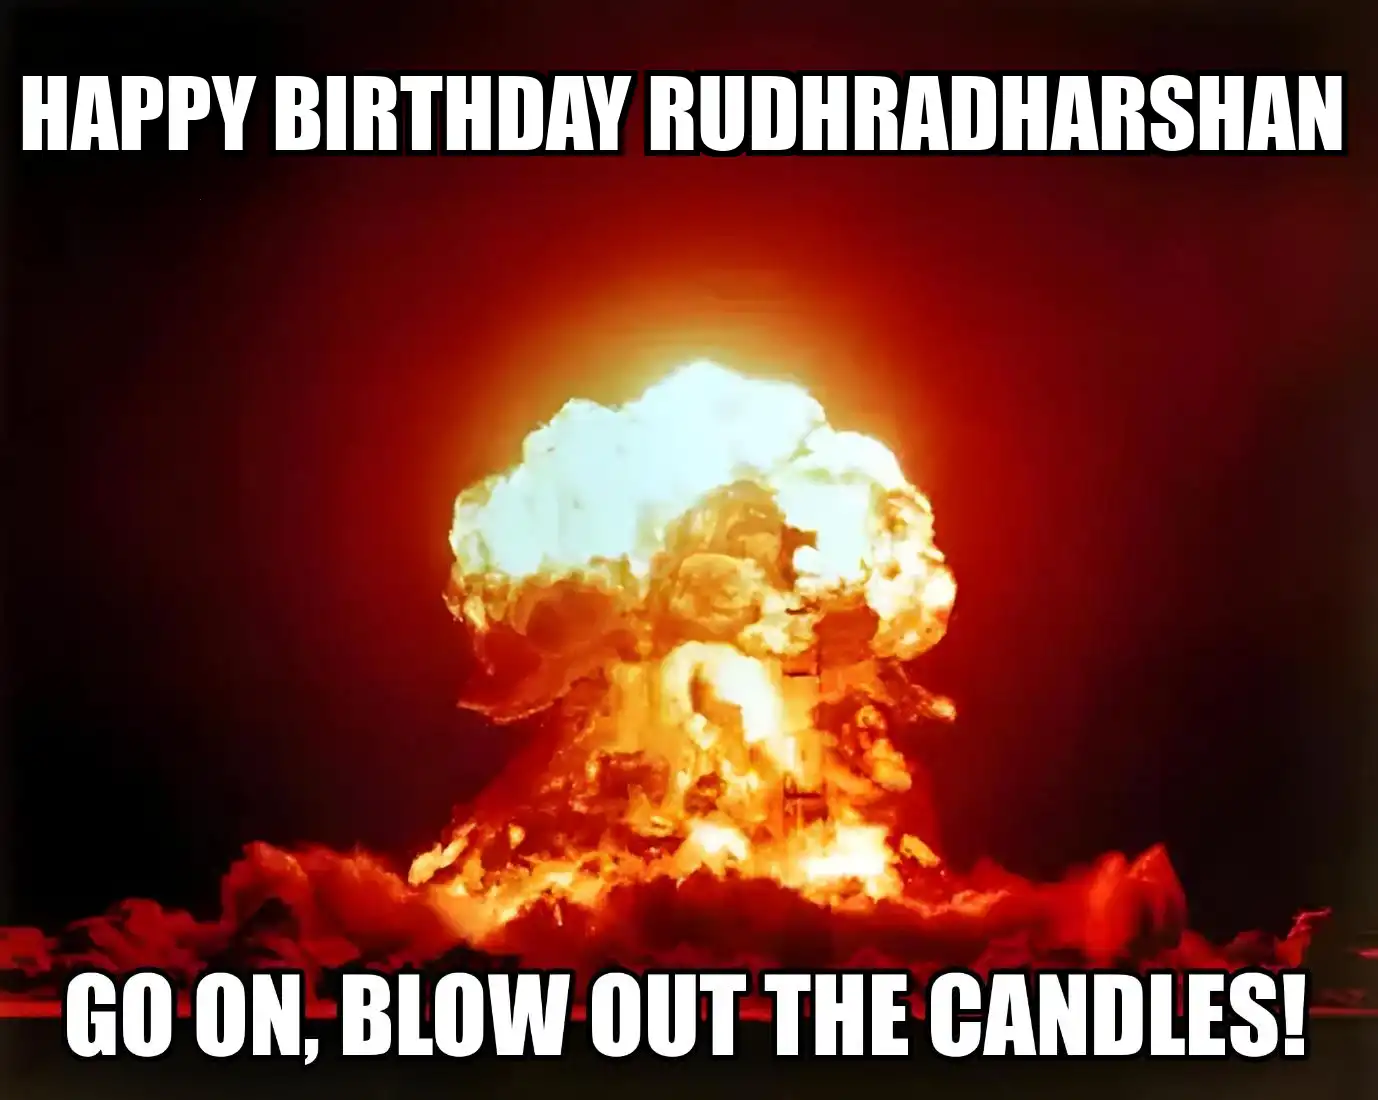 Happy Birthday Rudhradharshan Go On Blow Out The Candles Meme